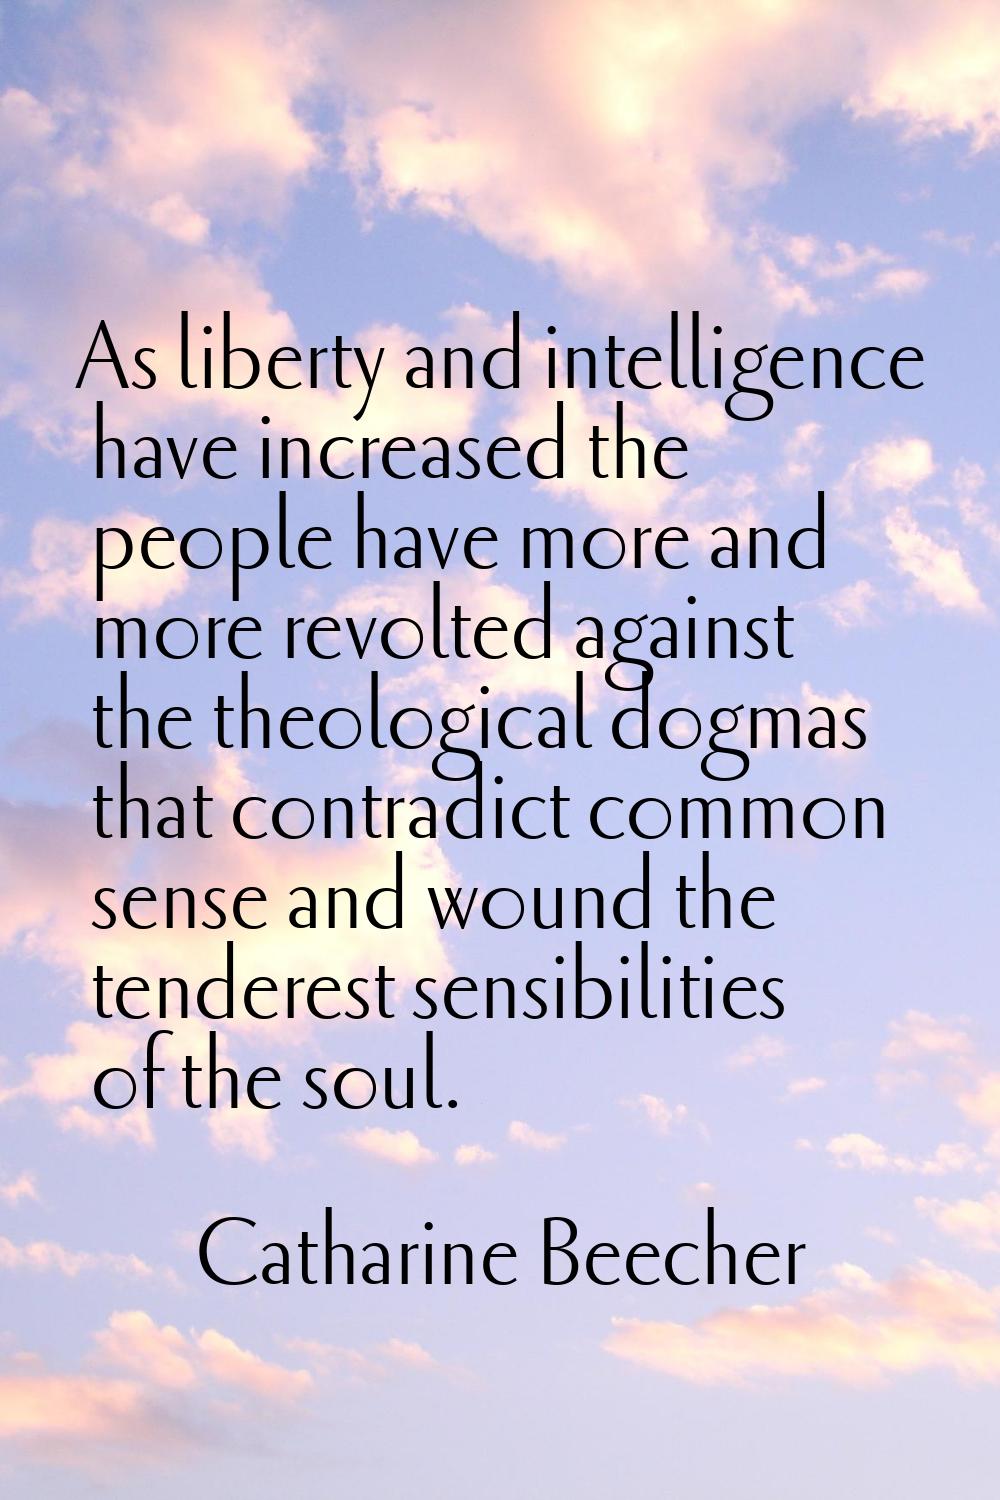 As liberty and intelligence have increased the people have more and more revolted against the theol